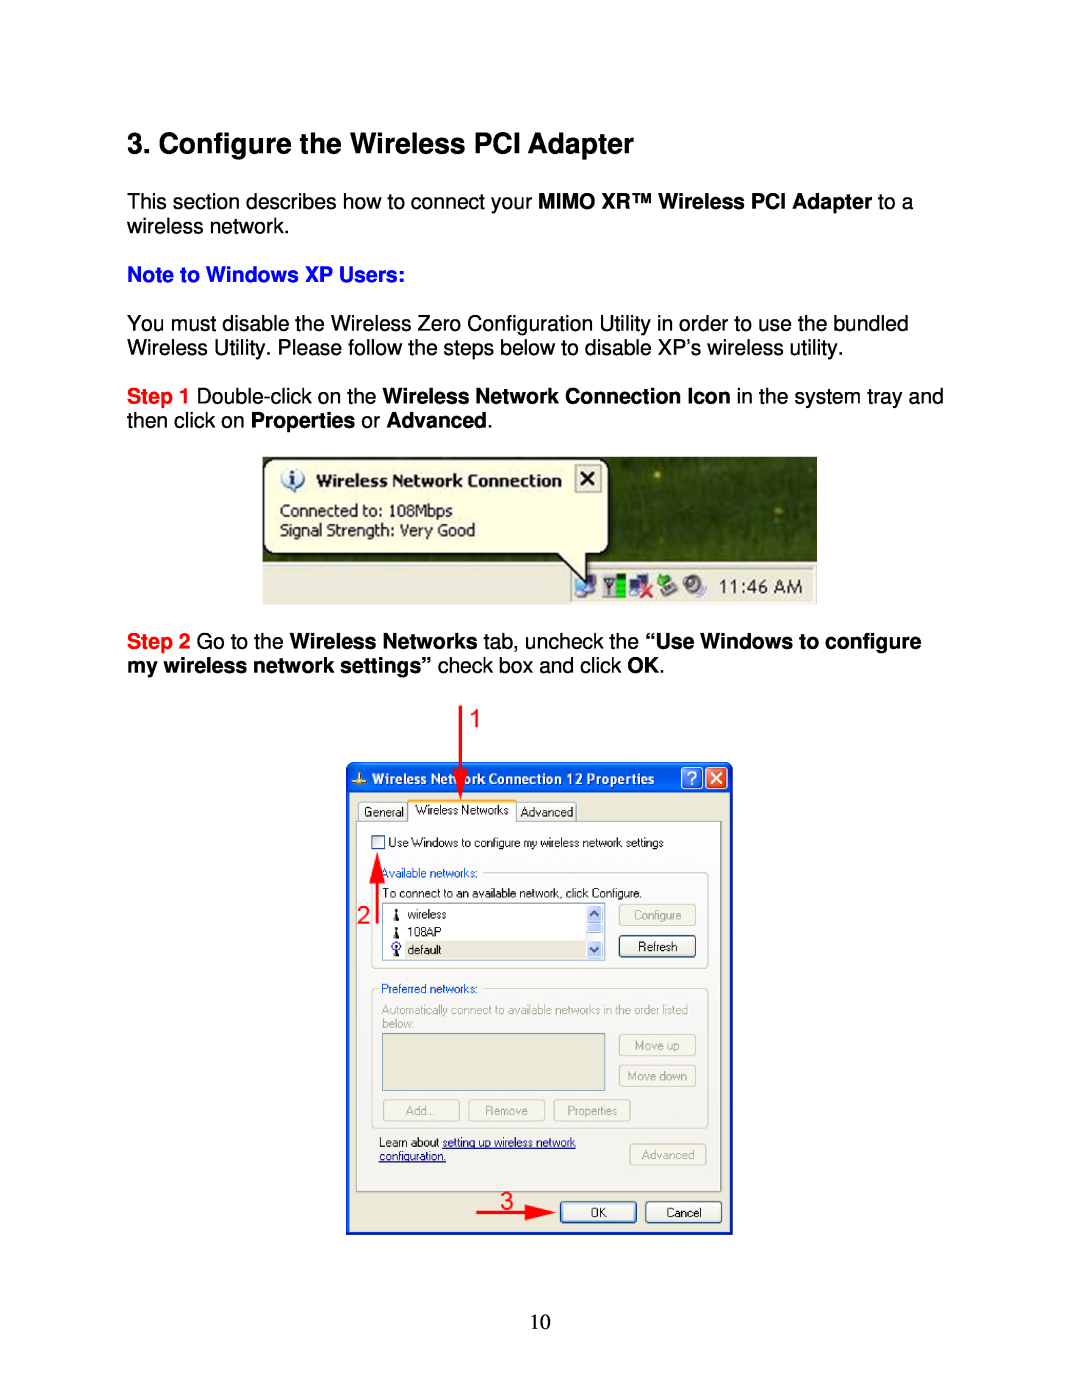 Airlink101 AWLH5025 user manual Configure the Wireless PCI Adapter, Note to Windows XP Users 